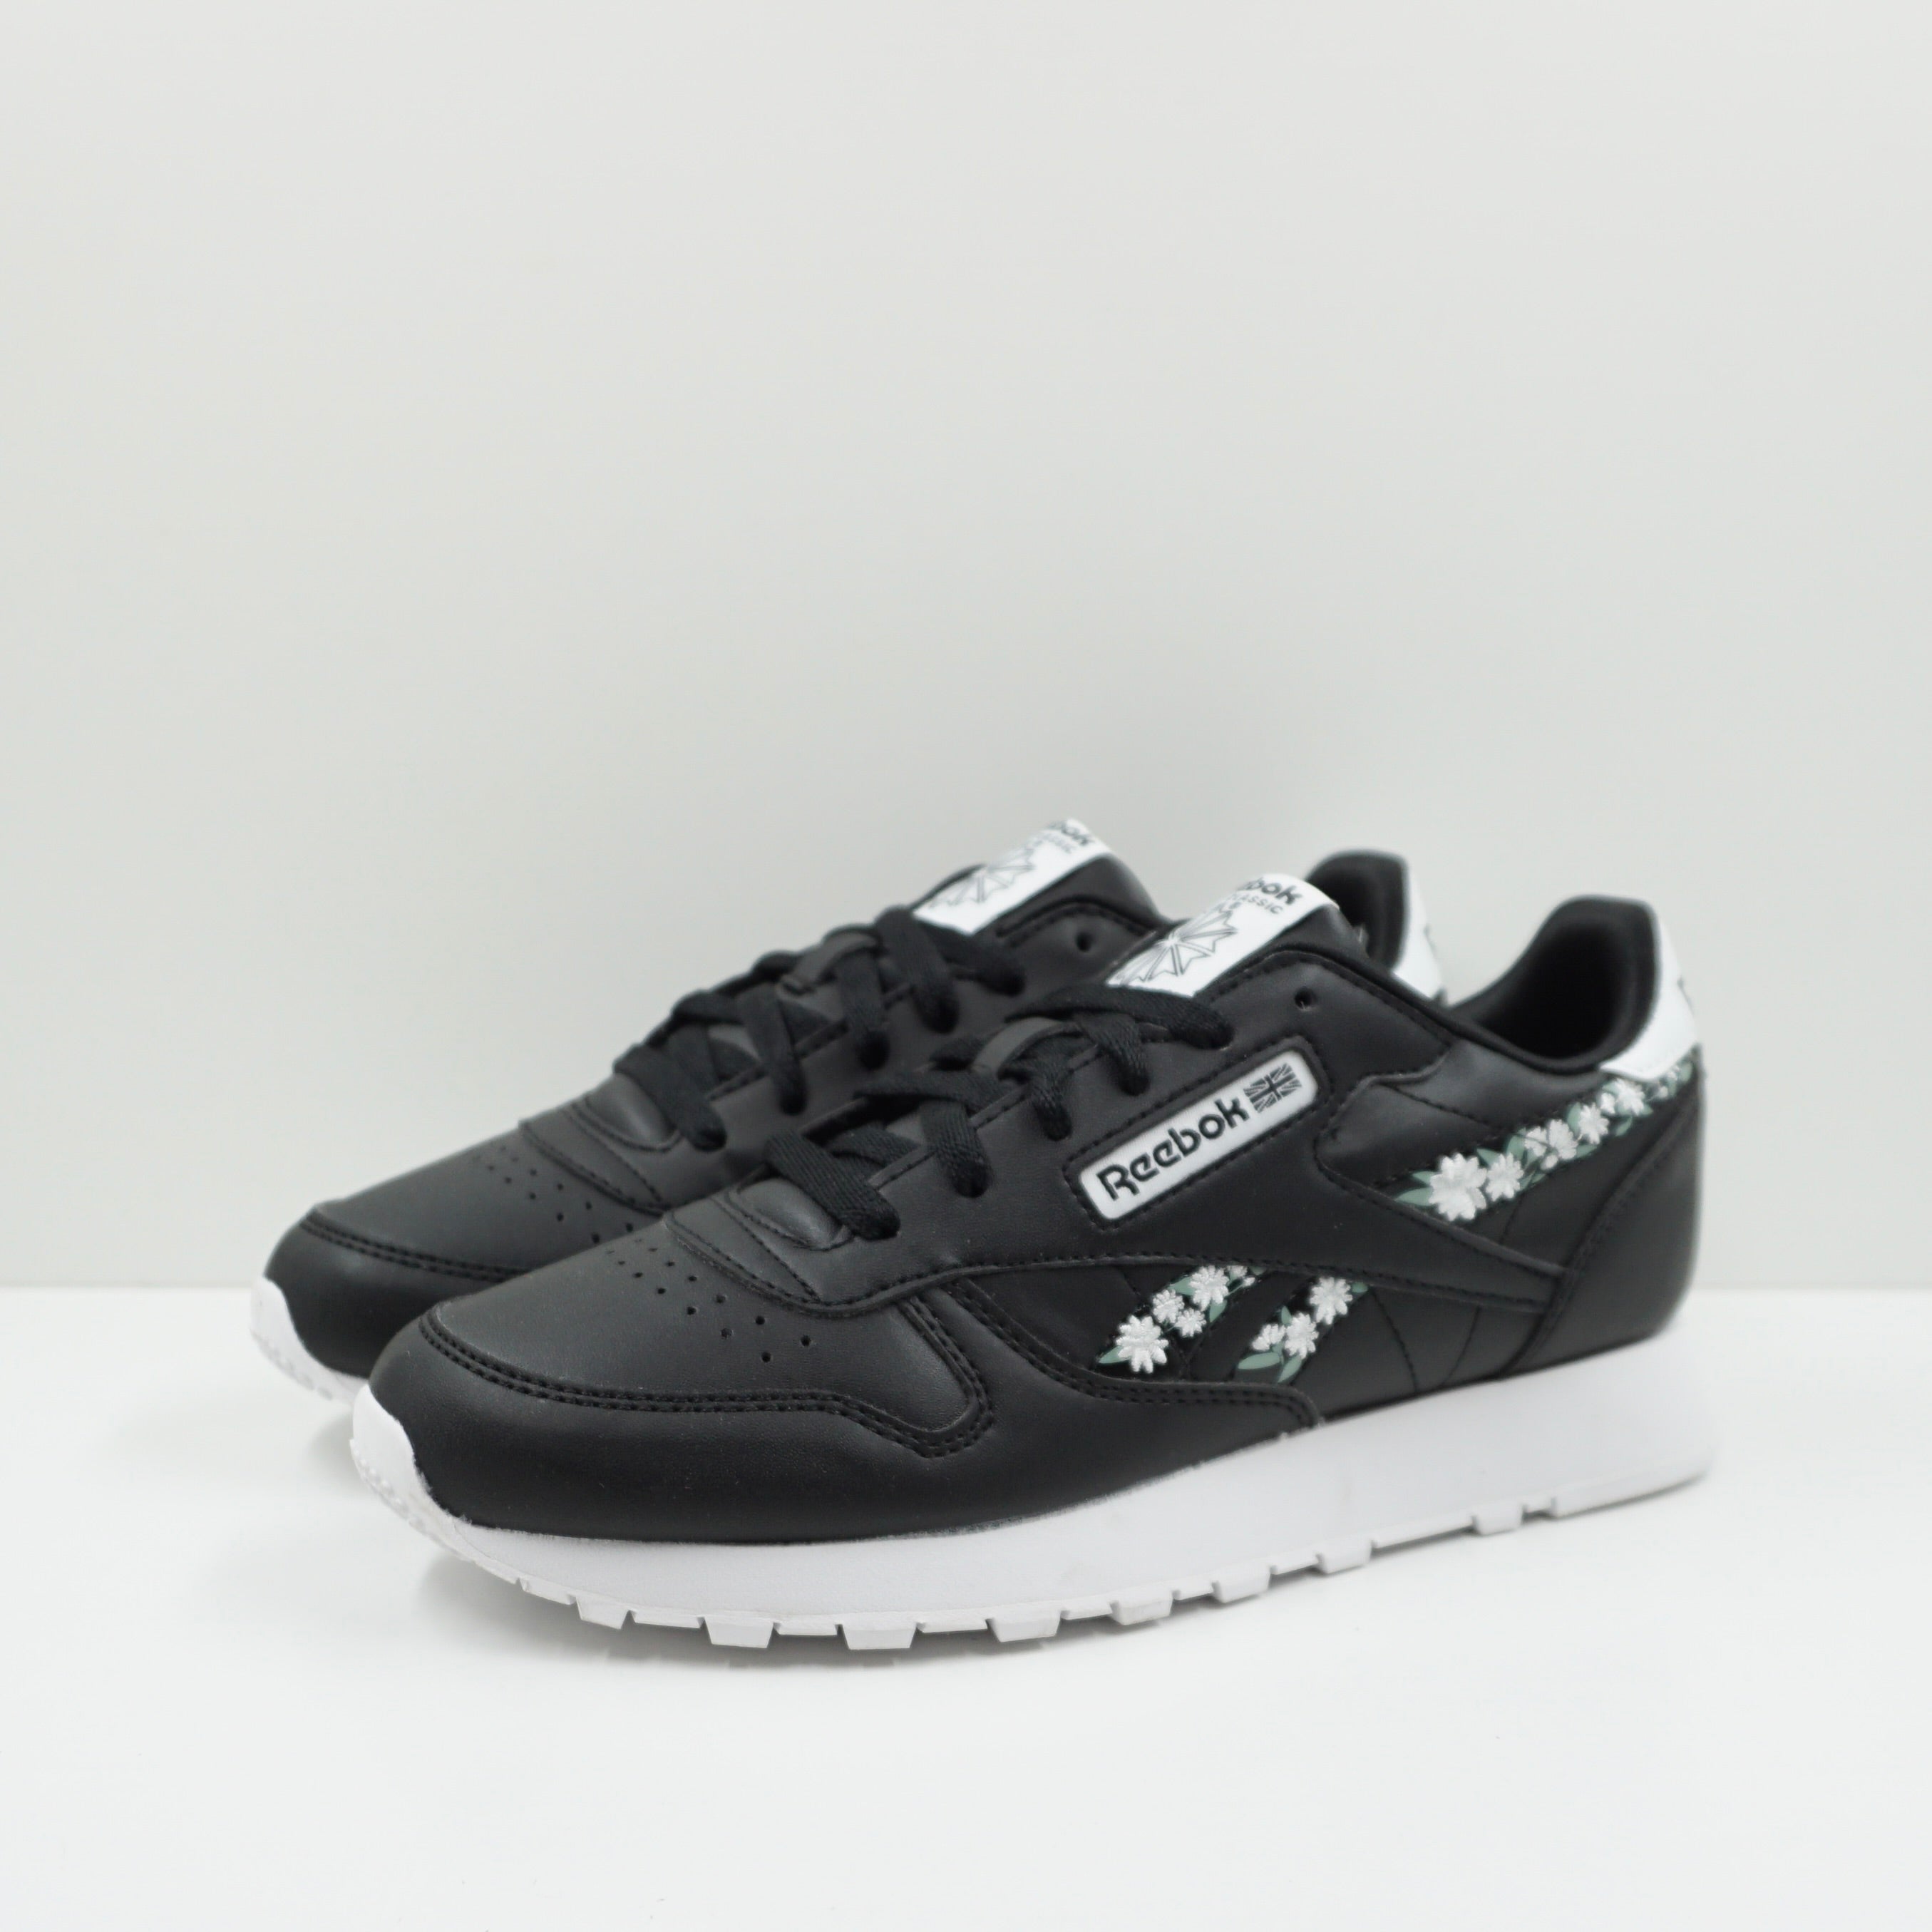 Reebok Classic Leather Flower Crowns Black White